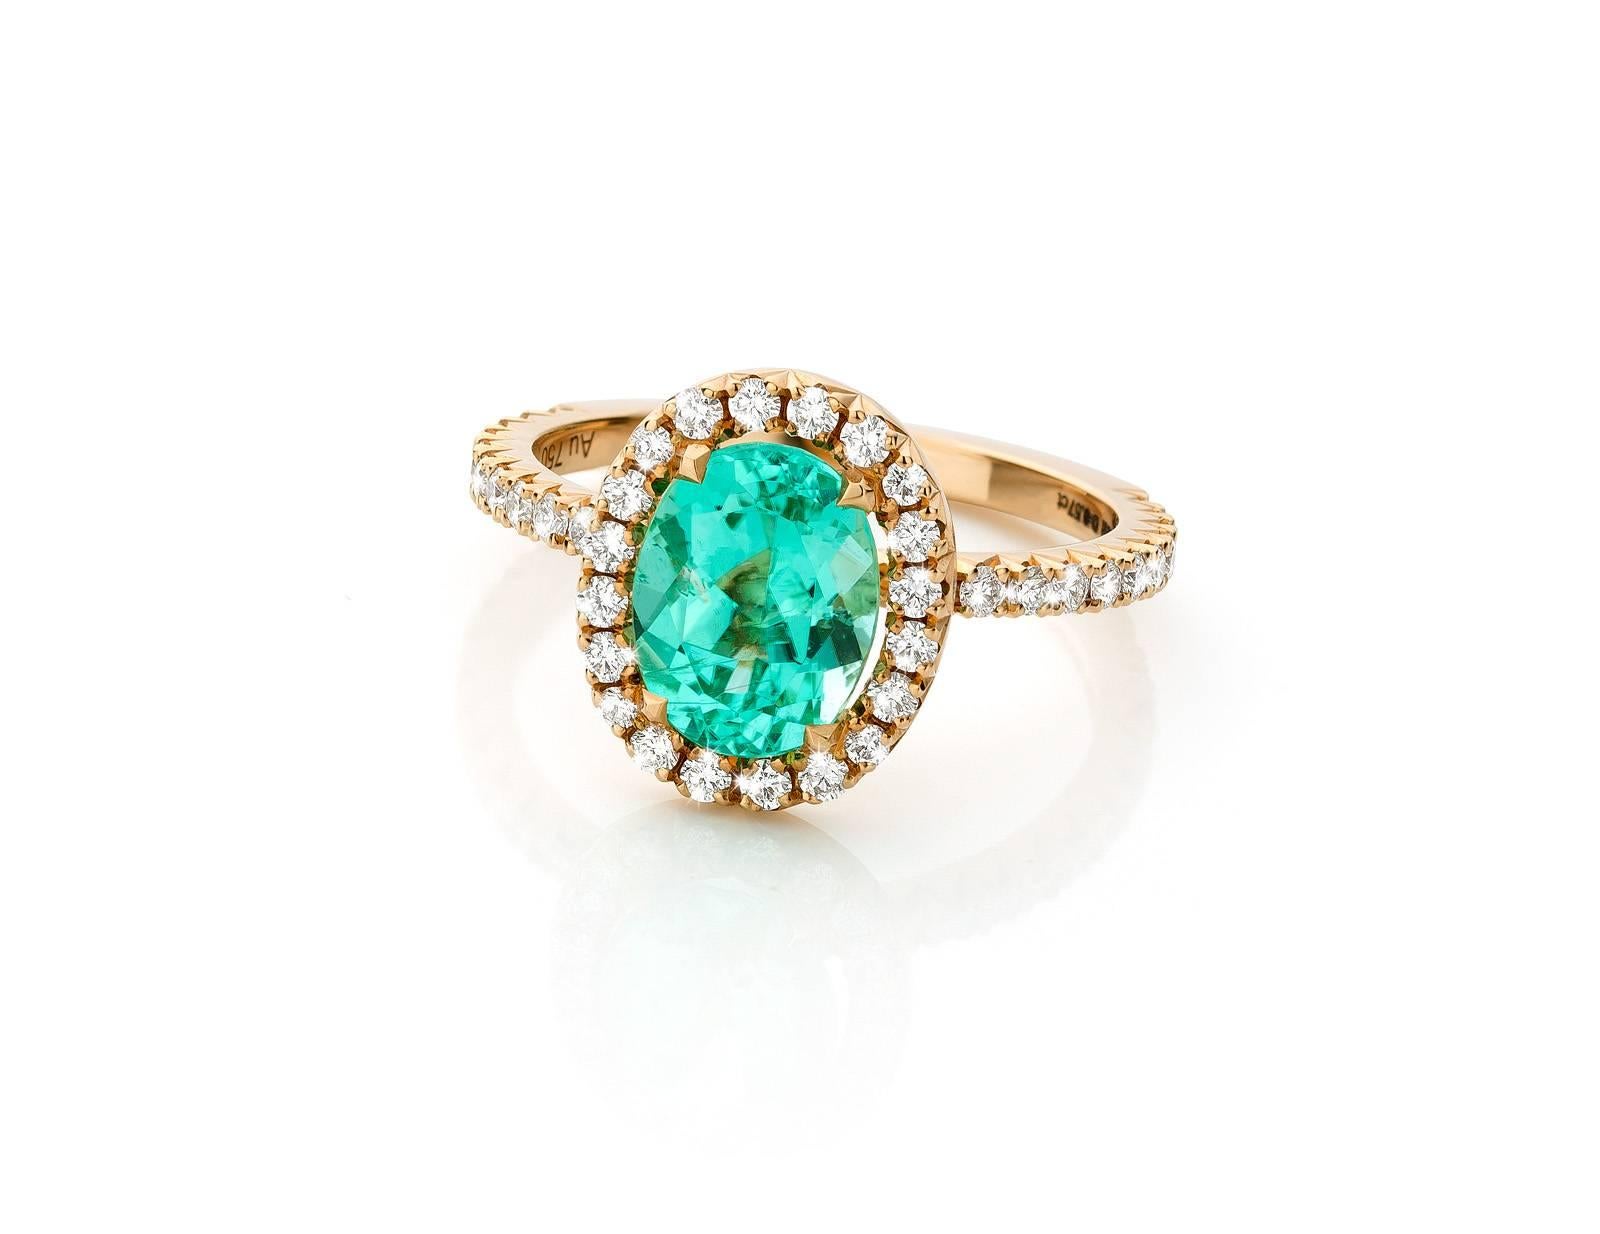 Paraiba tourmaline : 1,97 carat oval measuring 9 x 7 mm
Diamonds 0,62 carat VVS1 quality DEF color

This ring is made in Belgium and set with top quality diamonds. These diamonds are calibrated and from collection grade. 
The setting of the diamonds